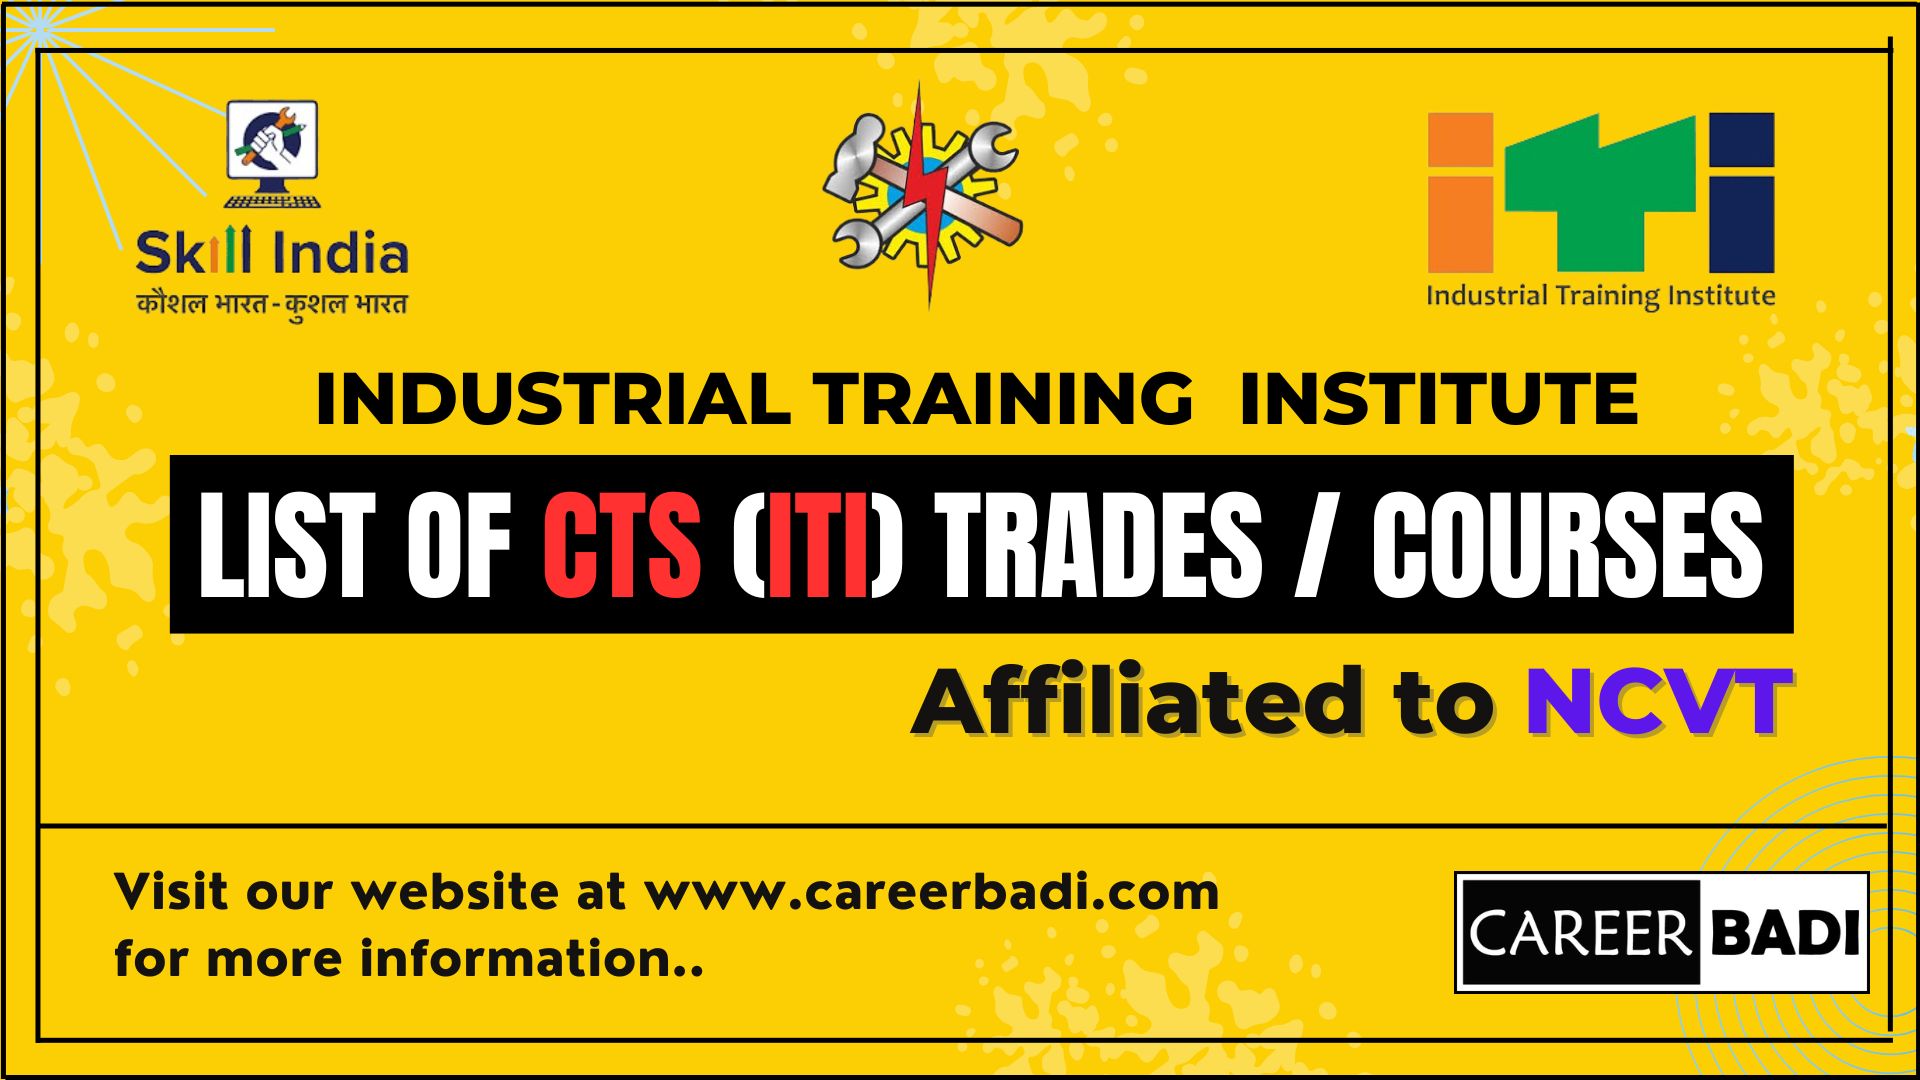 List of ITI Trades/Courses Affiliated to NCVT